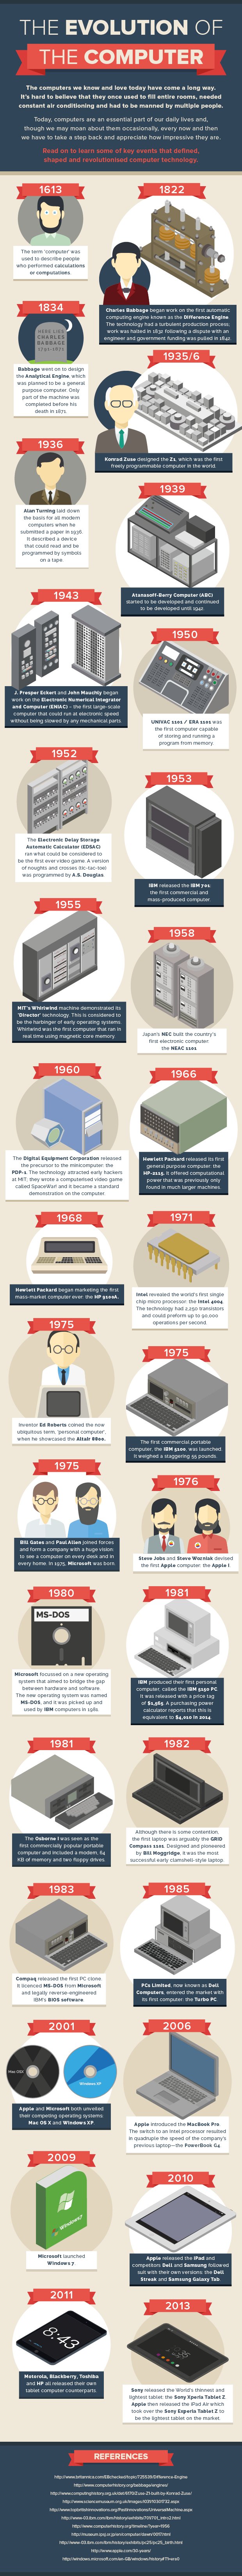 The Evolution of the Computer (Infographic)